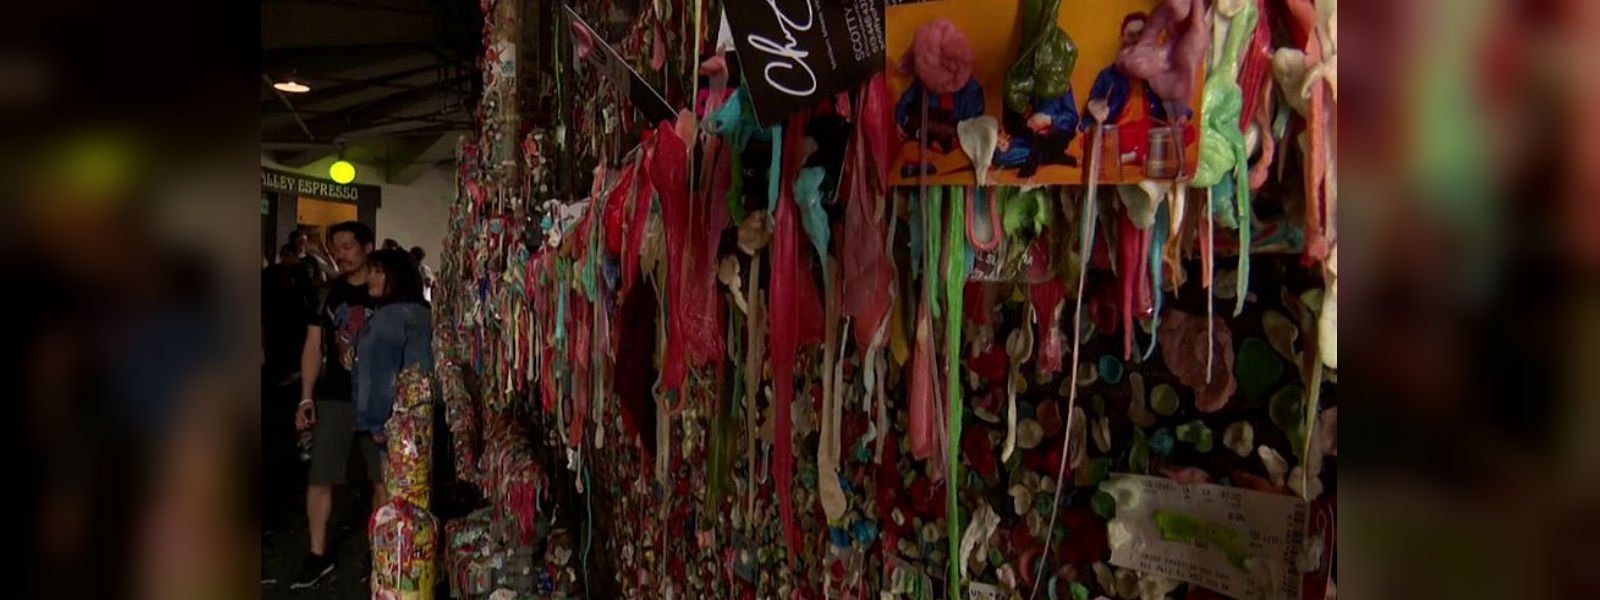 Sticky situation: Seattle’s ‘gum wall’ delights and disgusts in equal measure